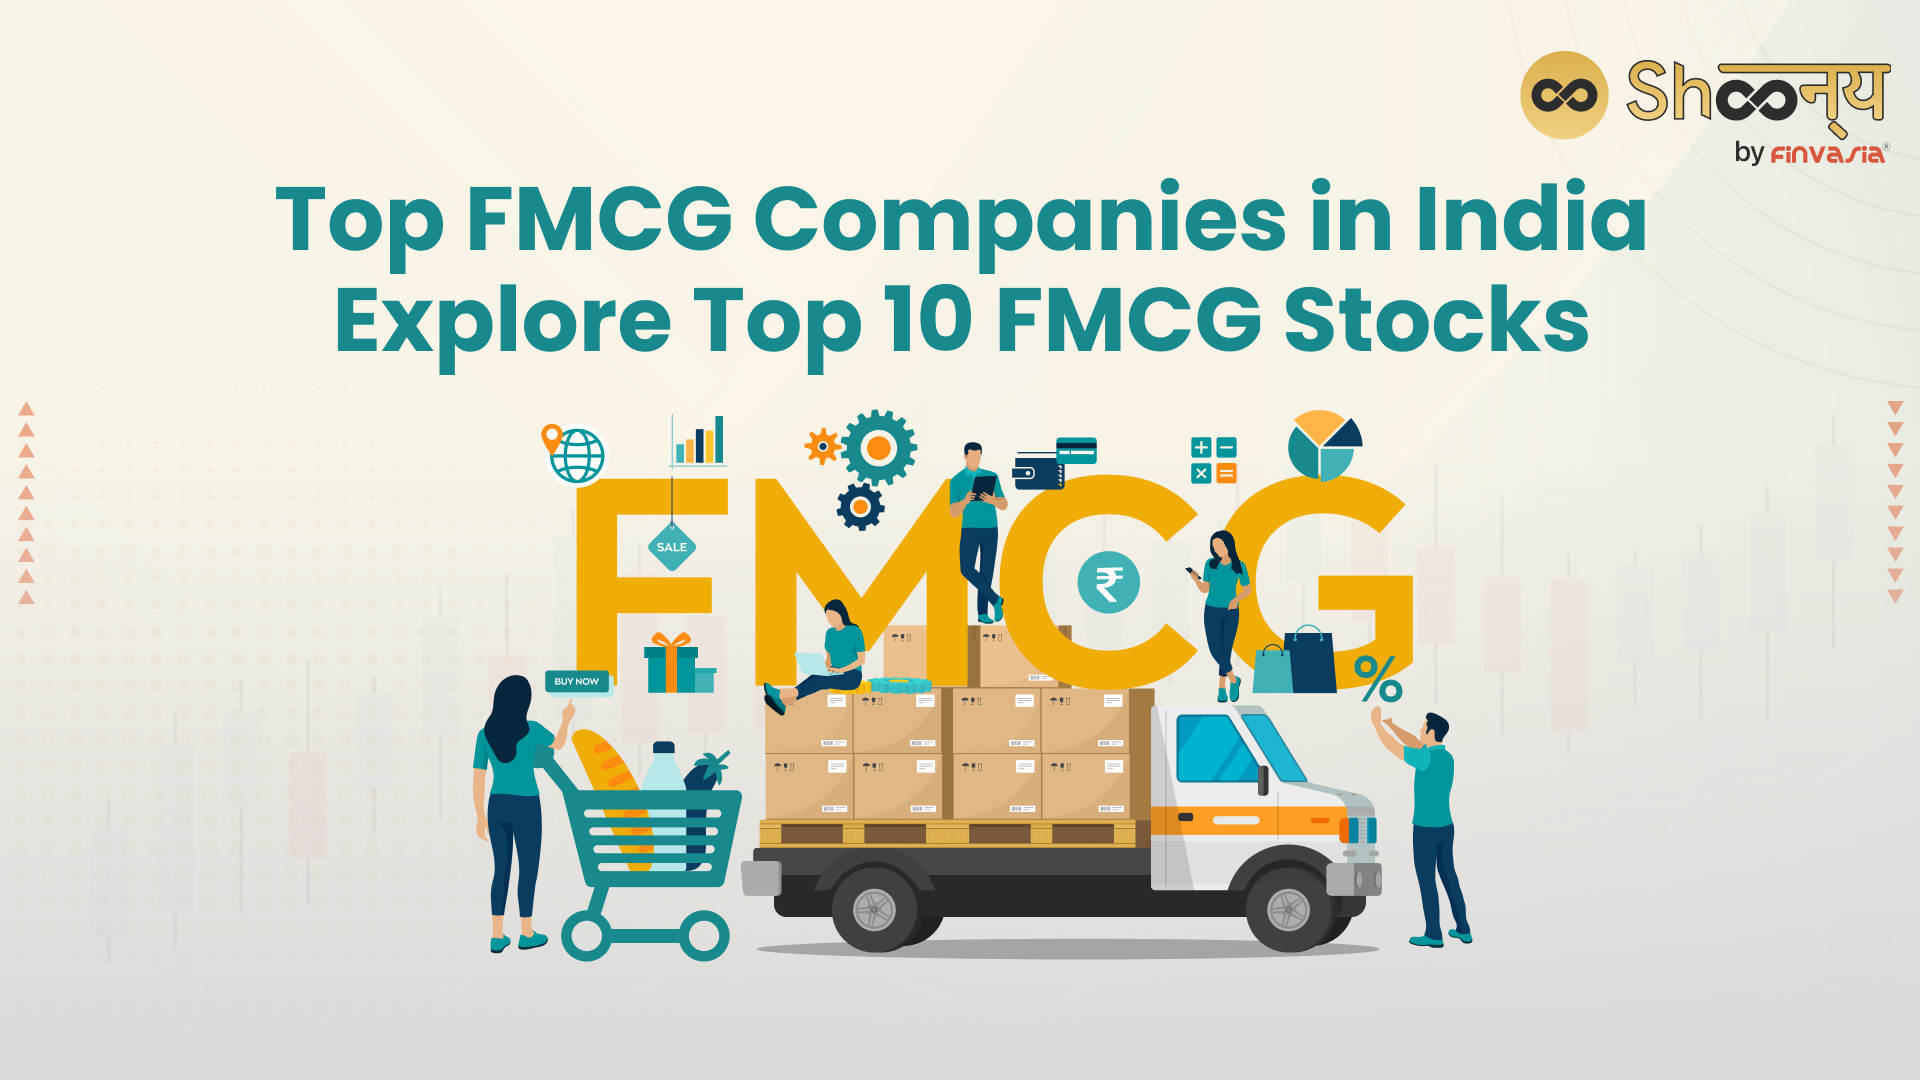 Check out the Top FMCG Companies in India